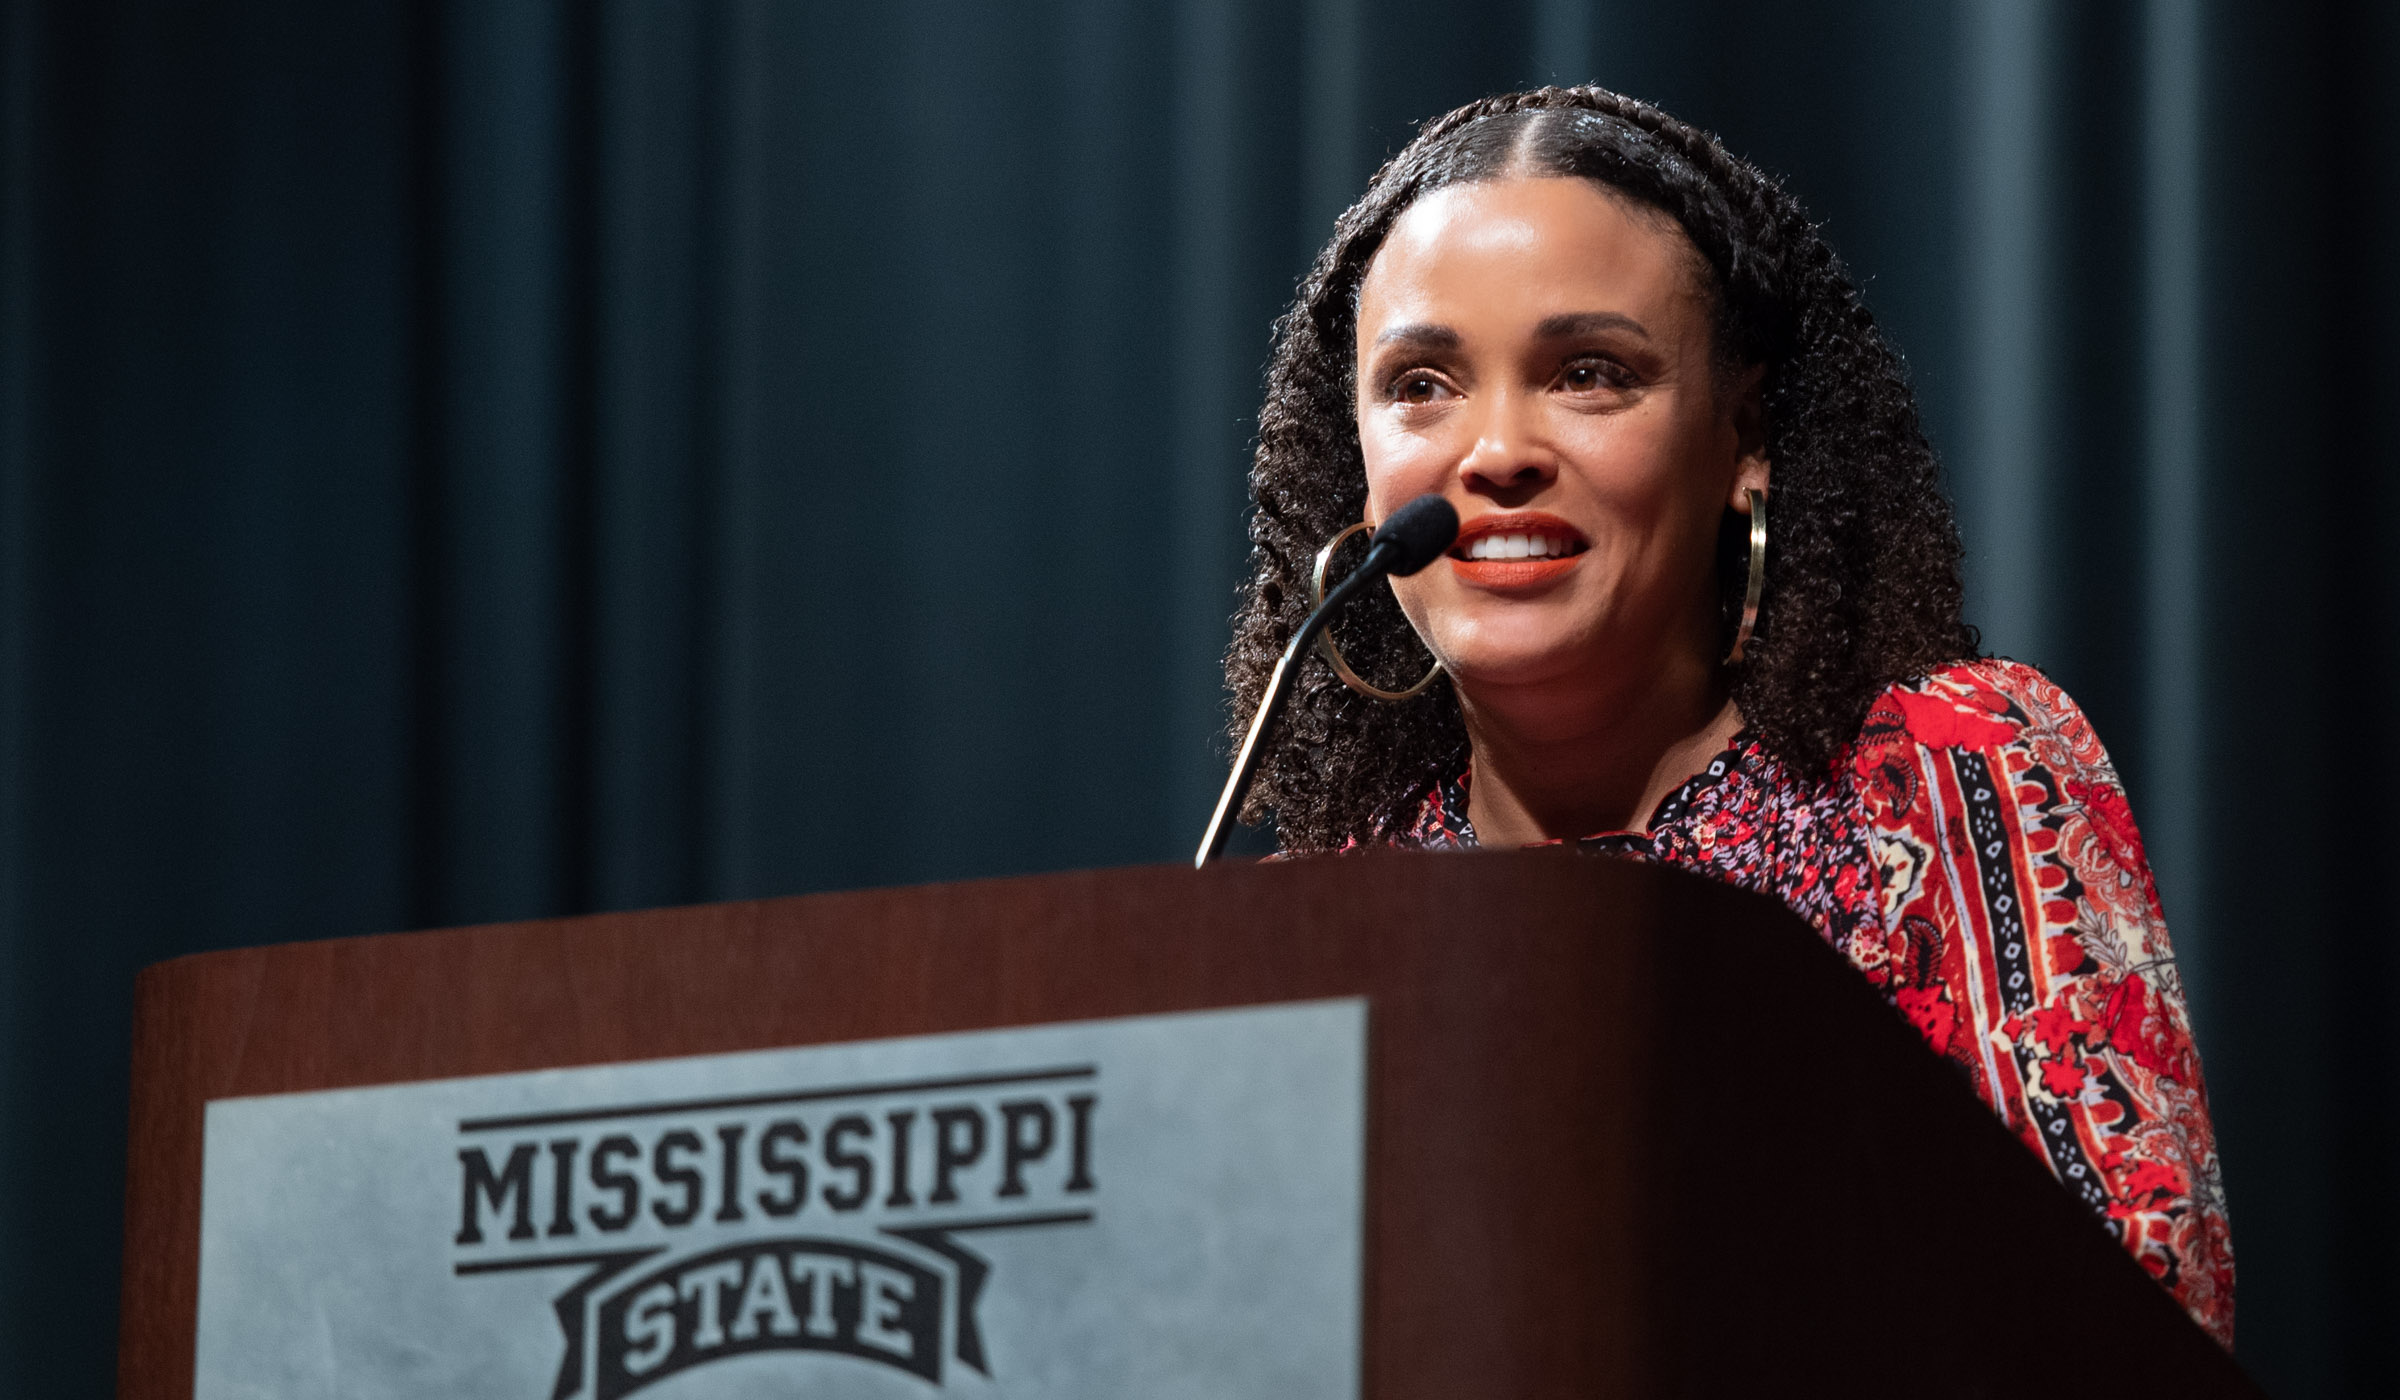 Author Jesmyn Ward speaks behind a podium with a microphone.